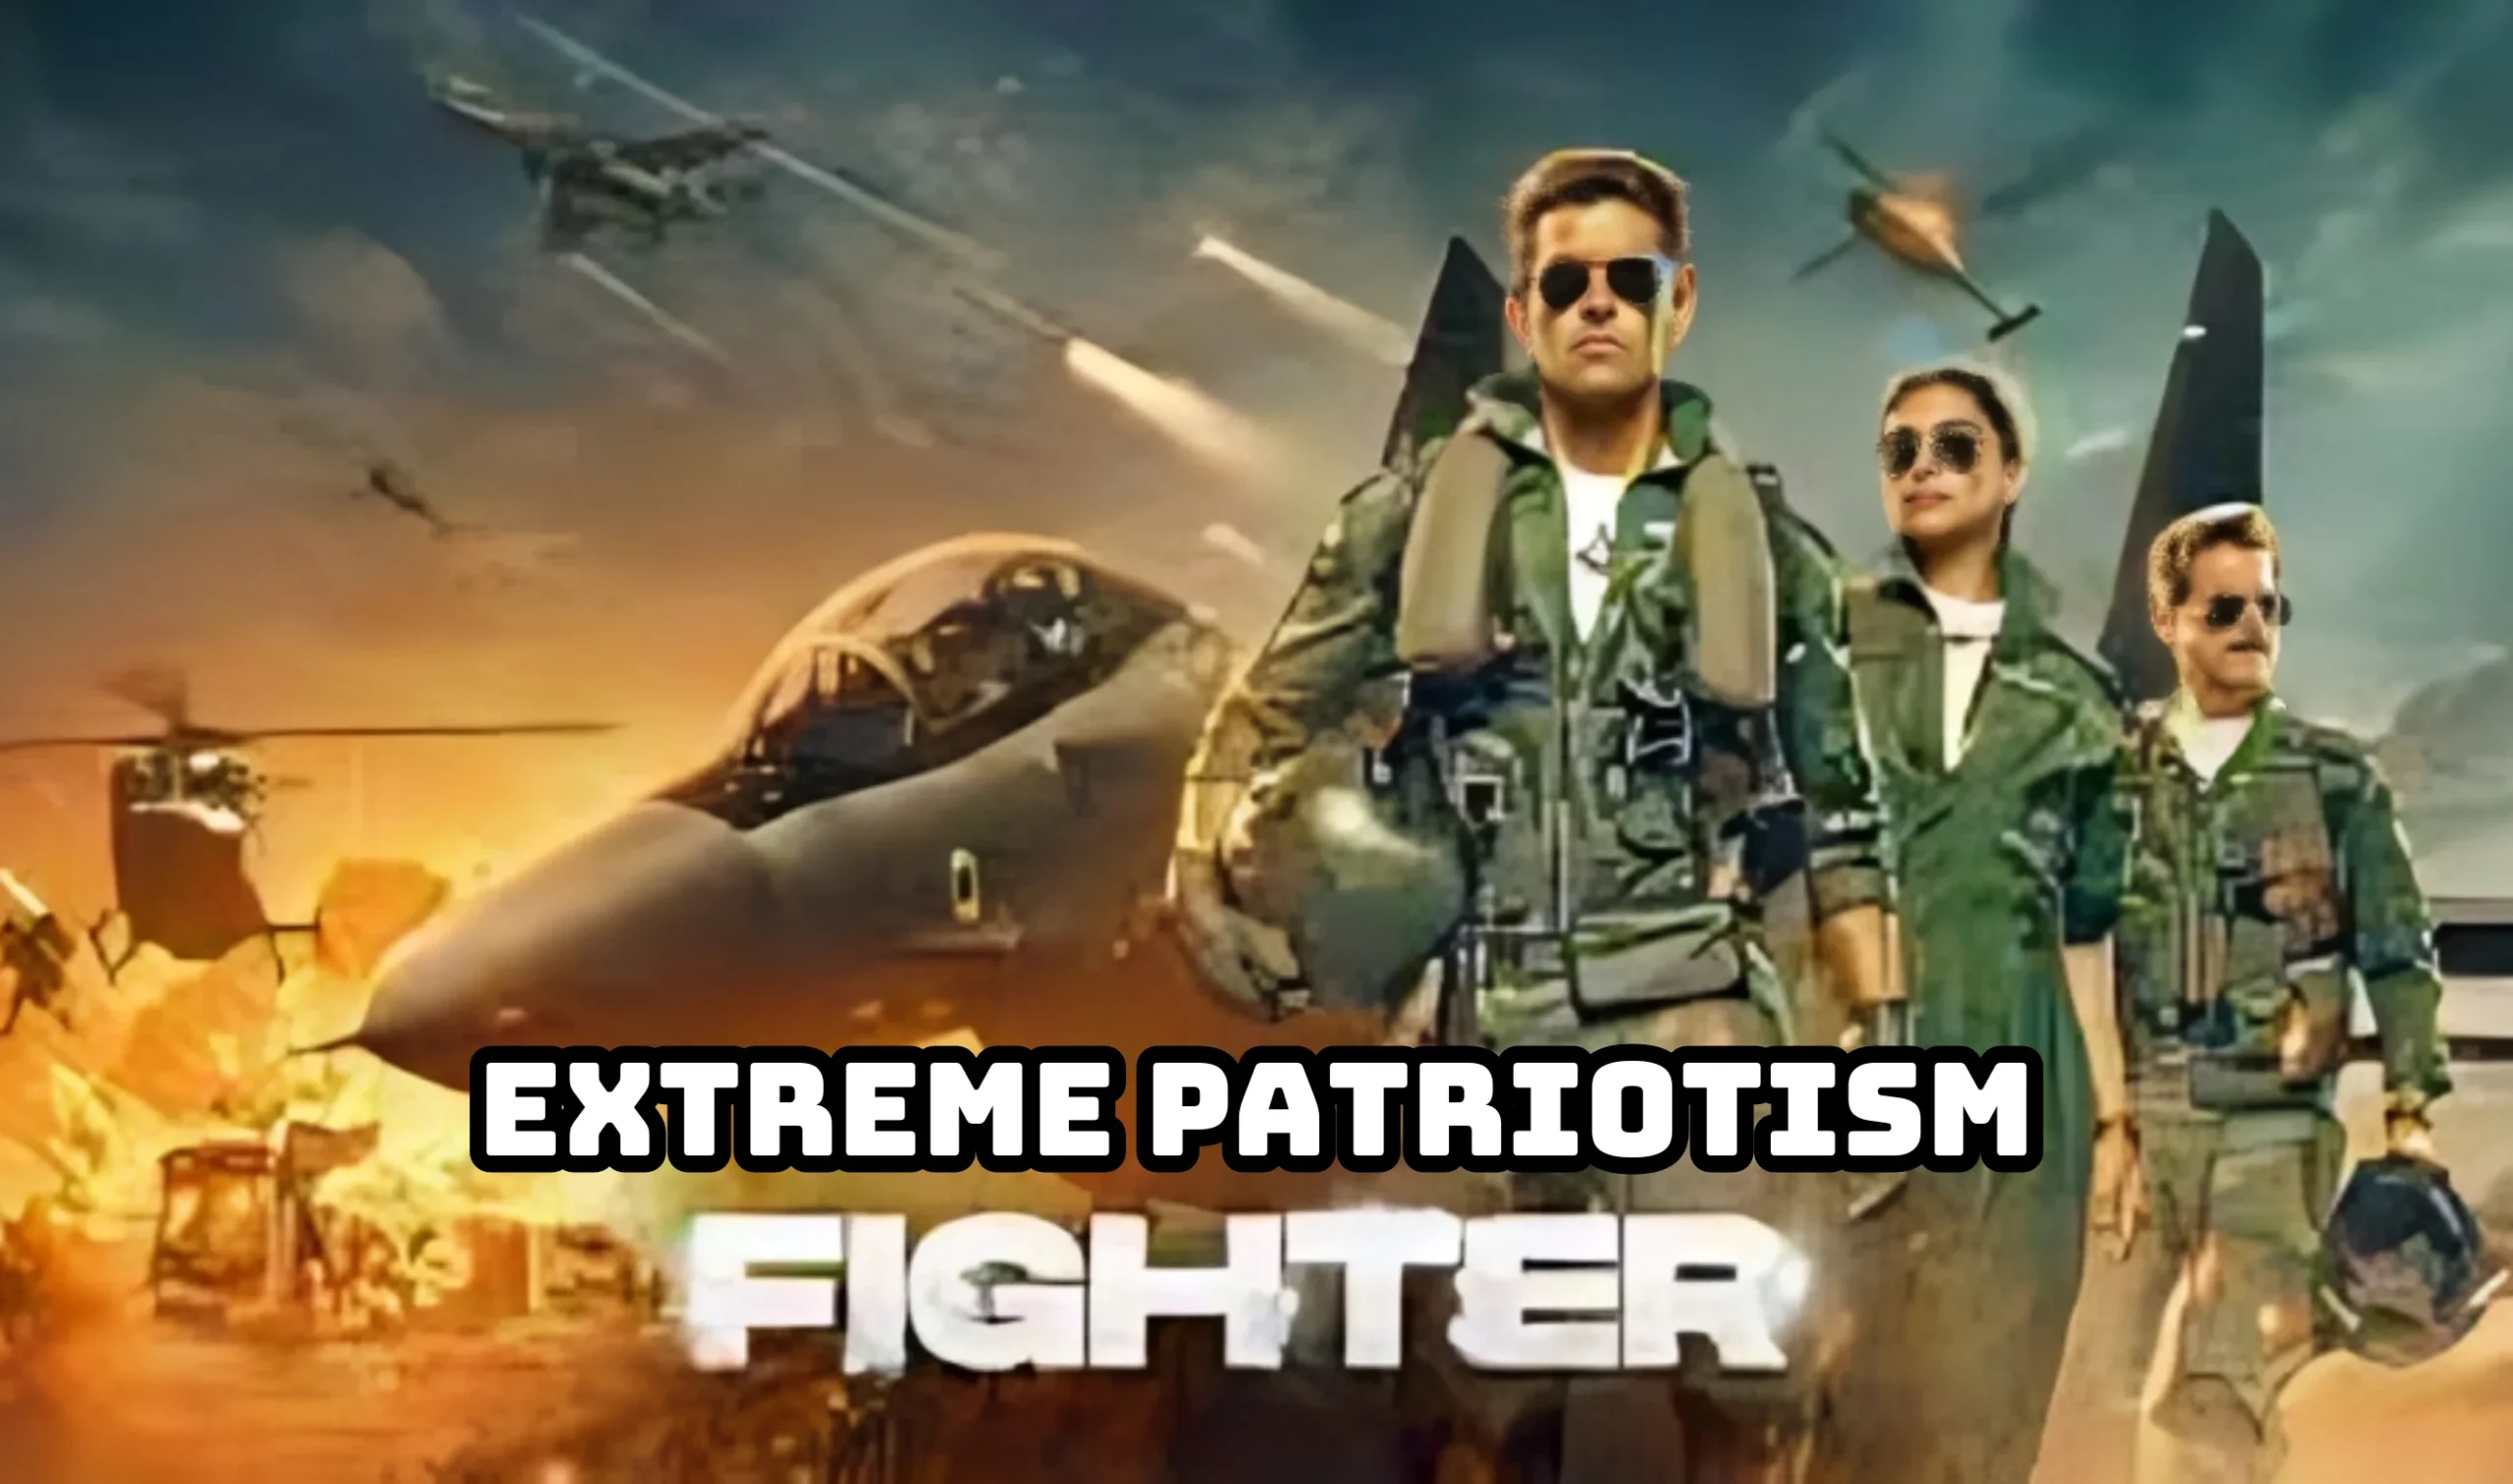 Fighter Trailer Breakdown: Extreme Patriotism But It’s Enough?